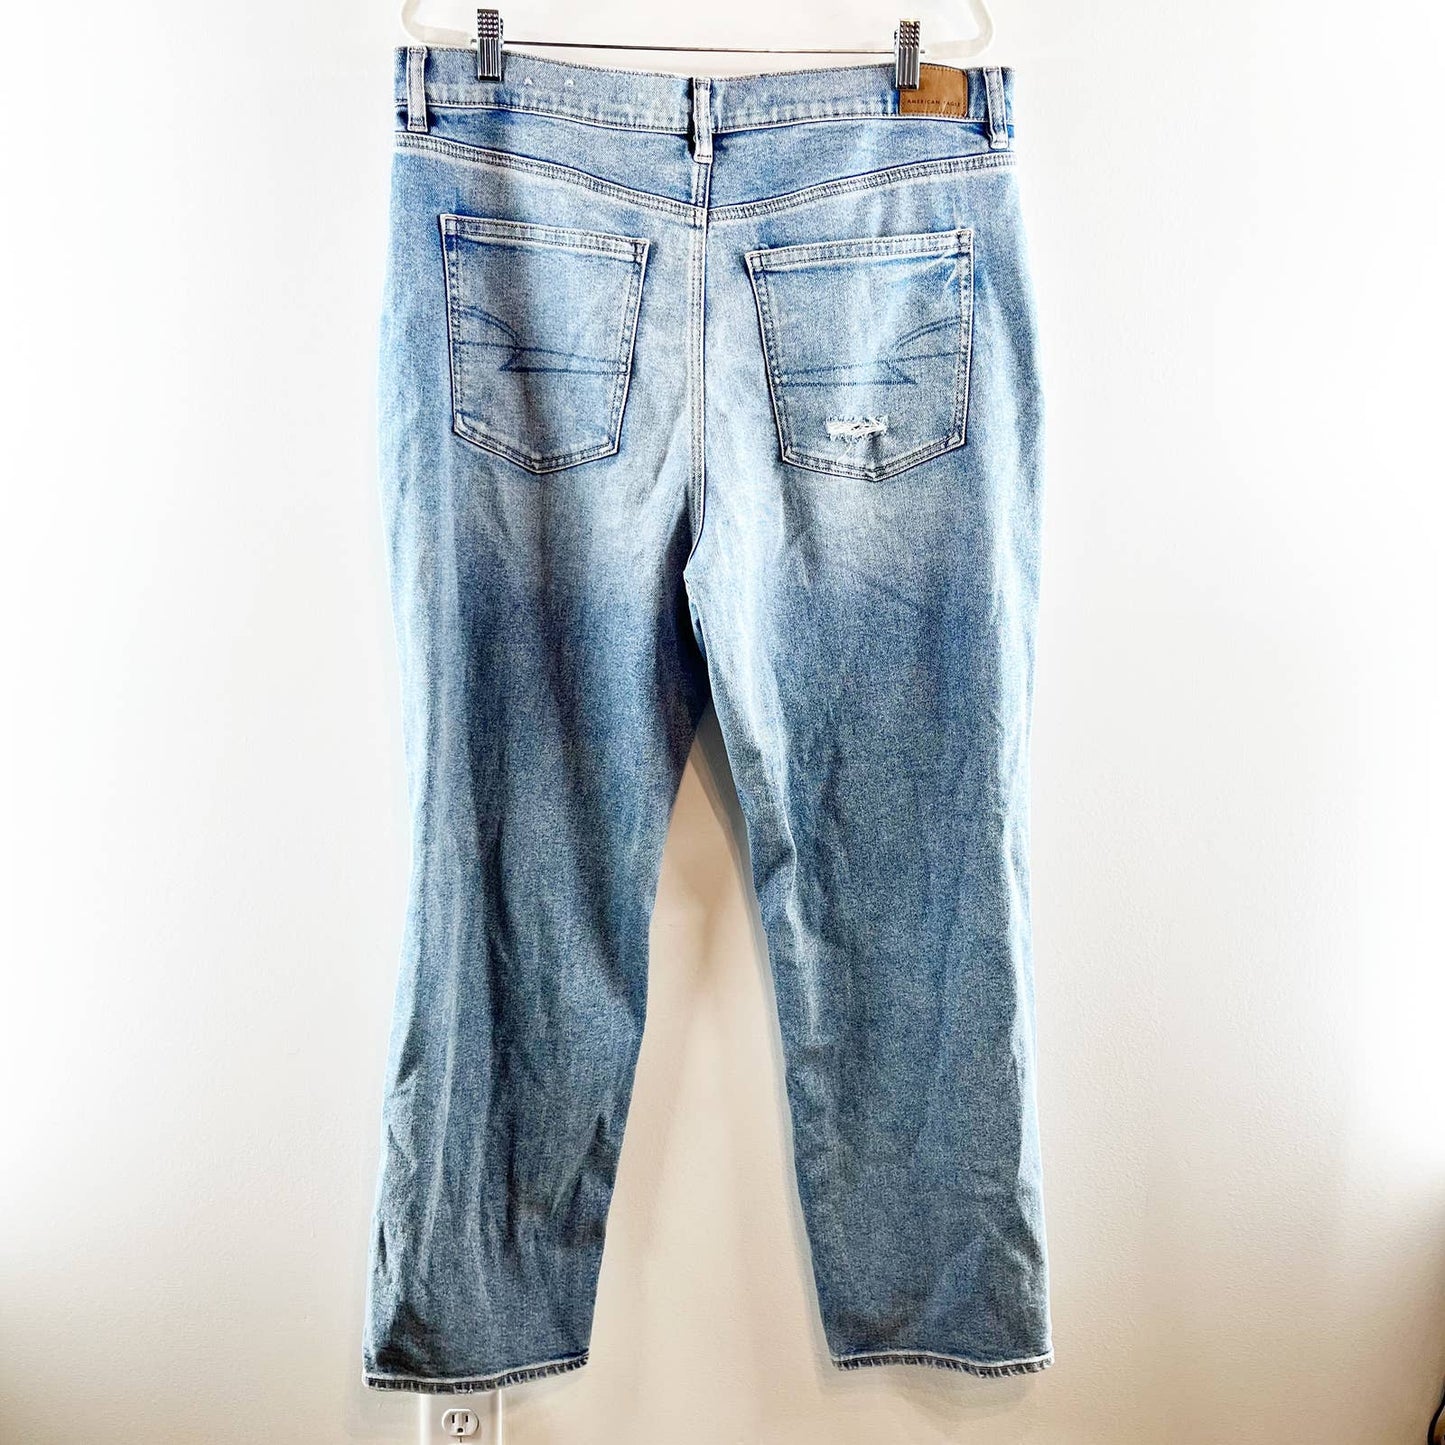 American Eagle Outfitters Highest Rise 90's Distressed Boyfriend Jeans Blue 18R